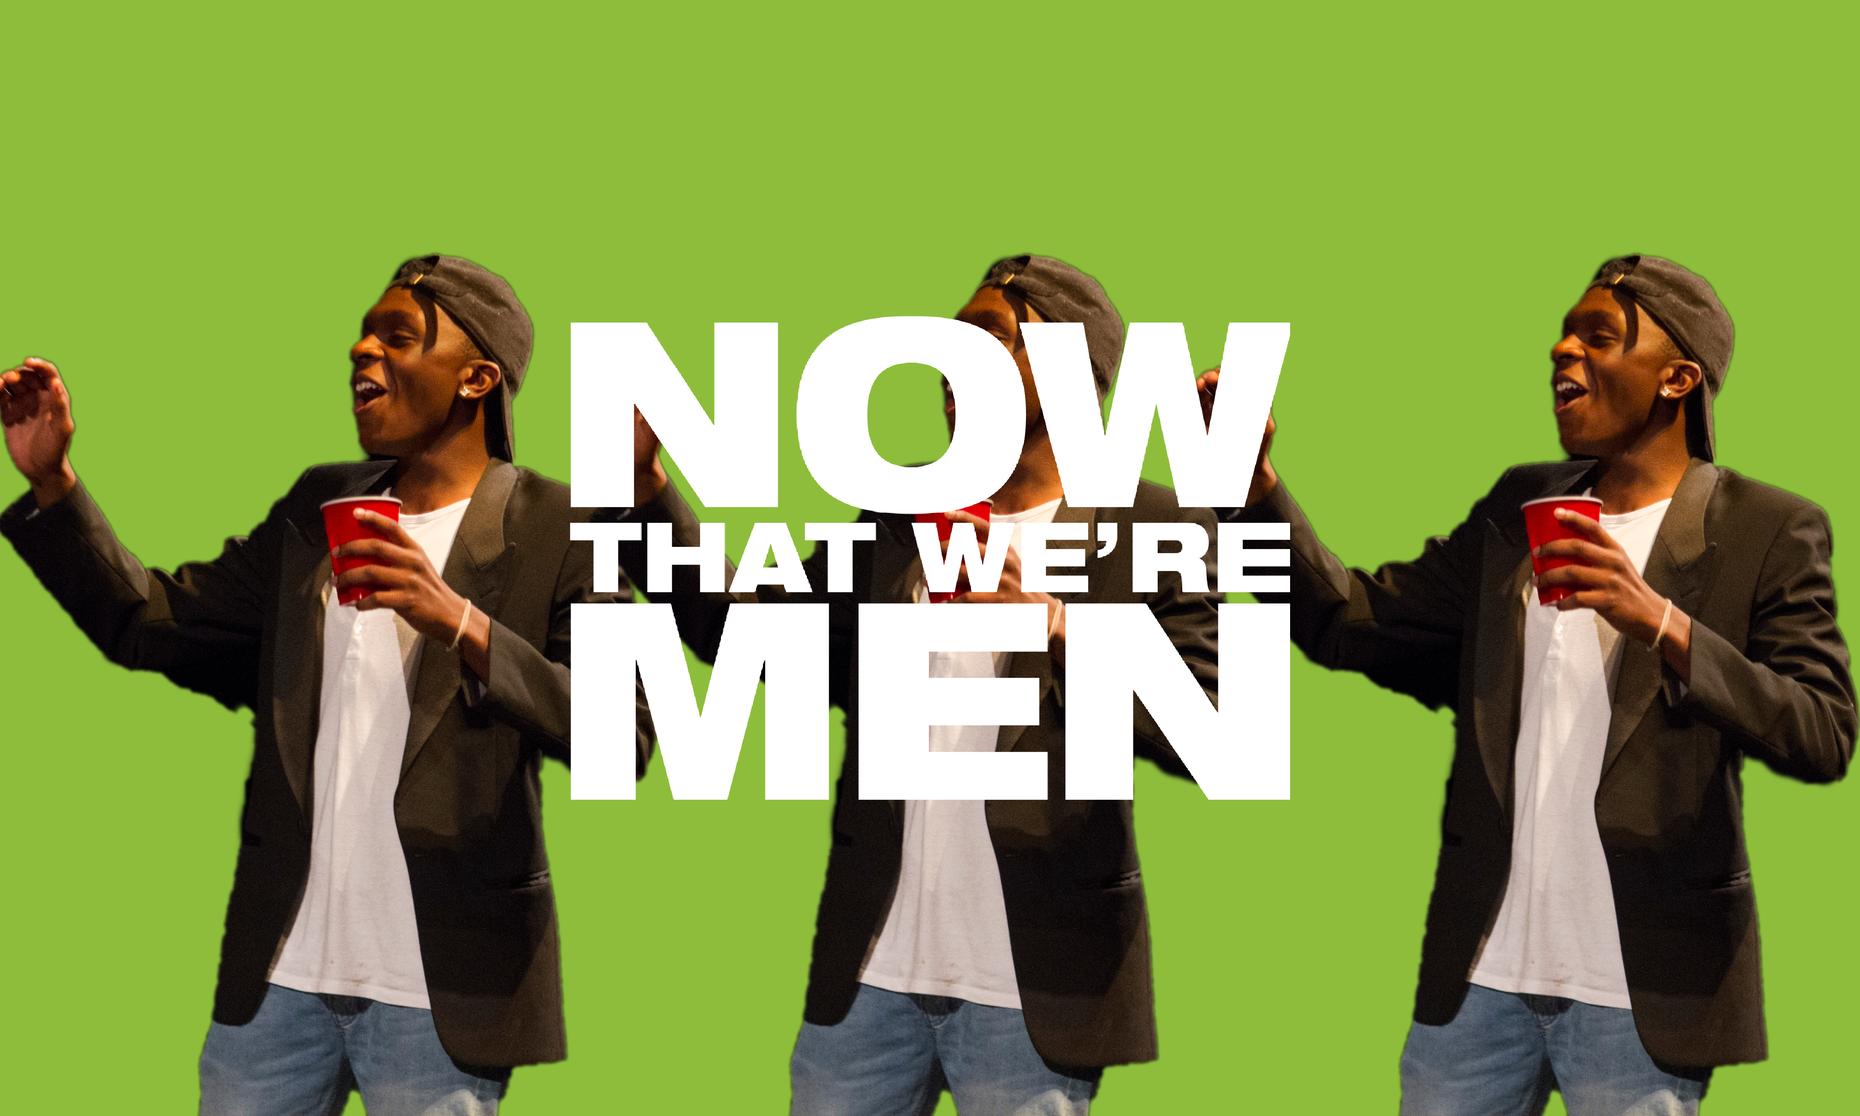 Now That We’re Men: The Play